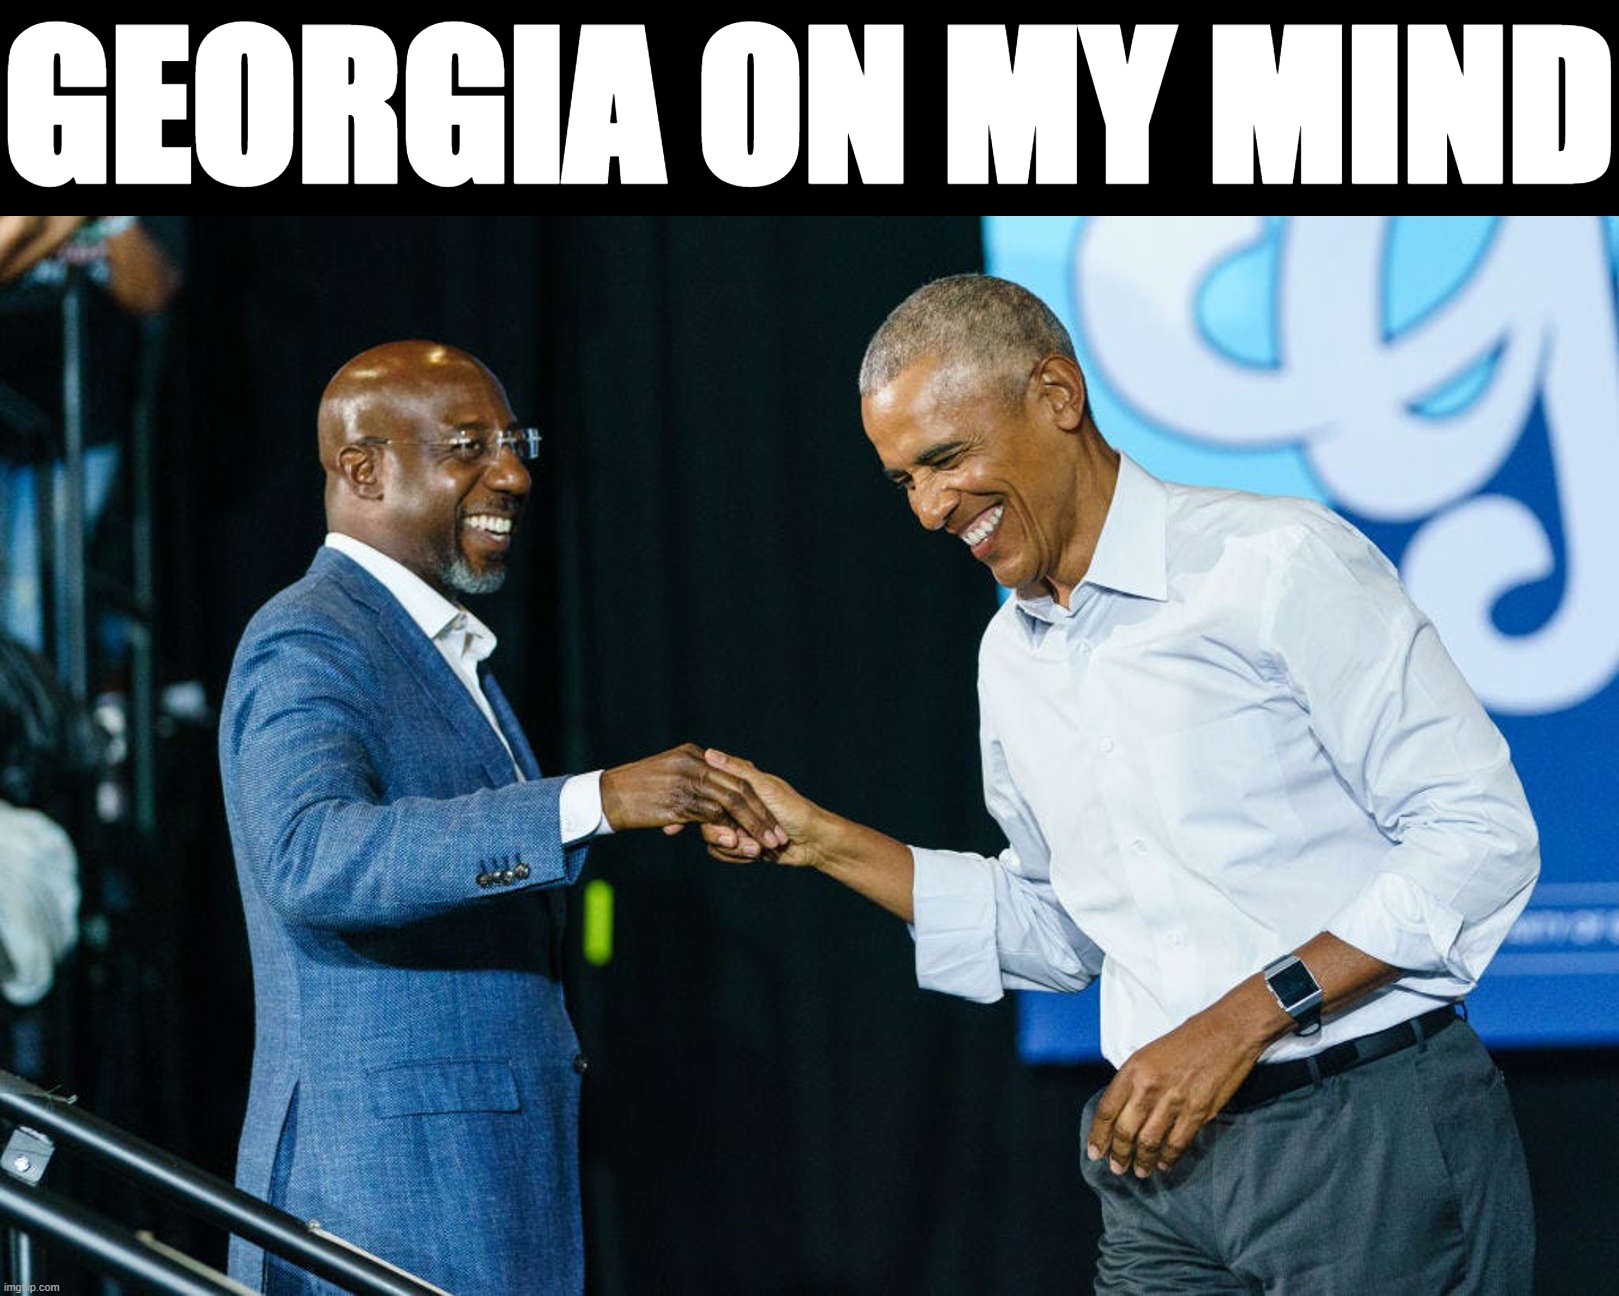 Sen. Warnock faces his second runoff election in 2 years - with a little help from his friends. | GEORGIA ON MY MIND | image tagged in barack obama and raphael warnock,raphael warnock,georgia,democrats,democratic party,senate | made w/ Imgflip meme maker